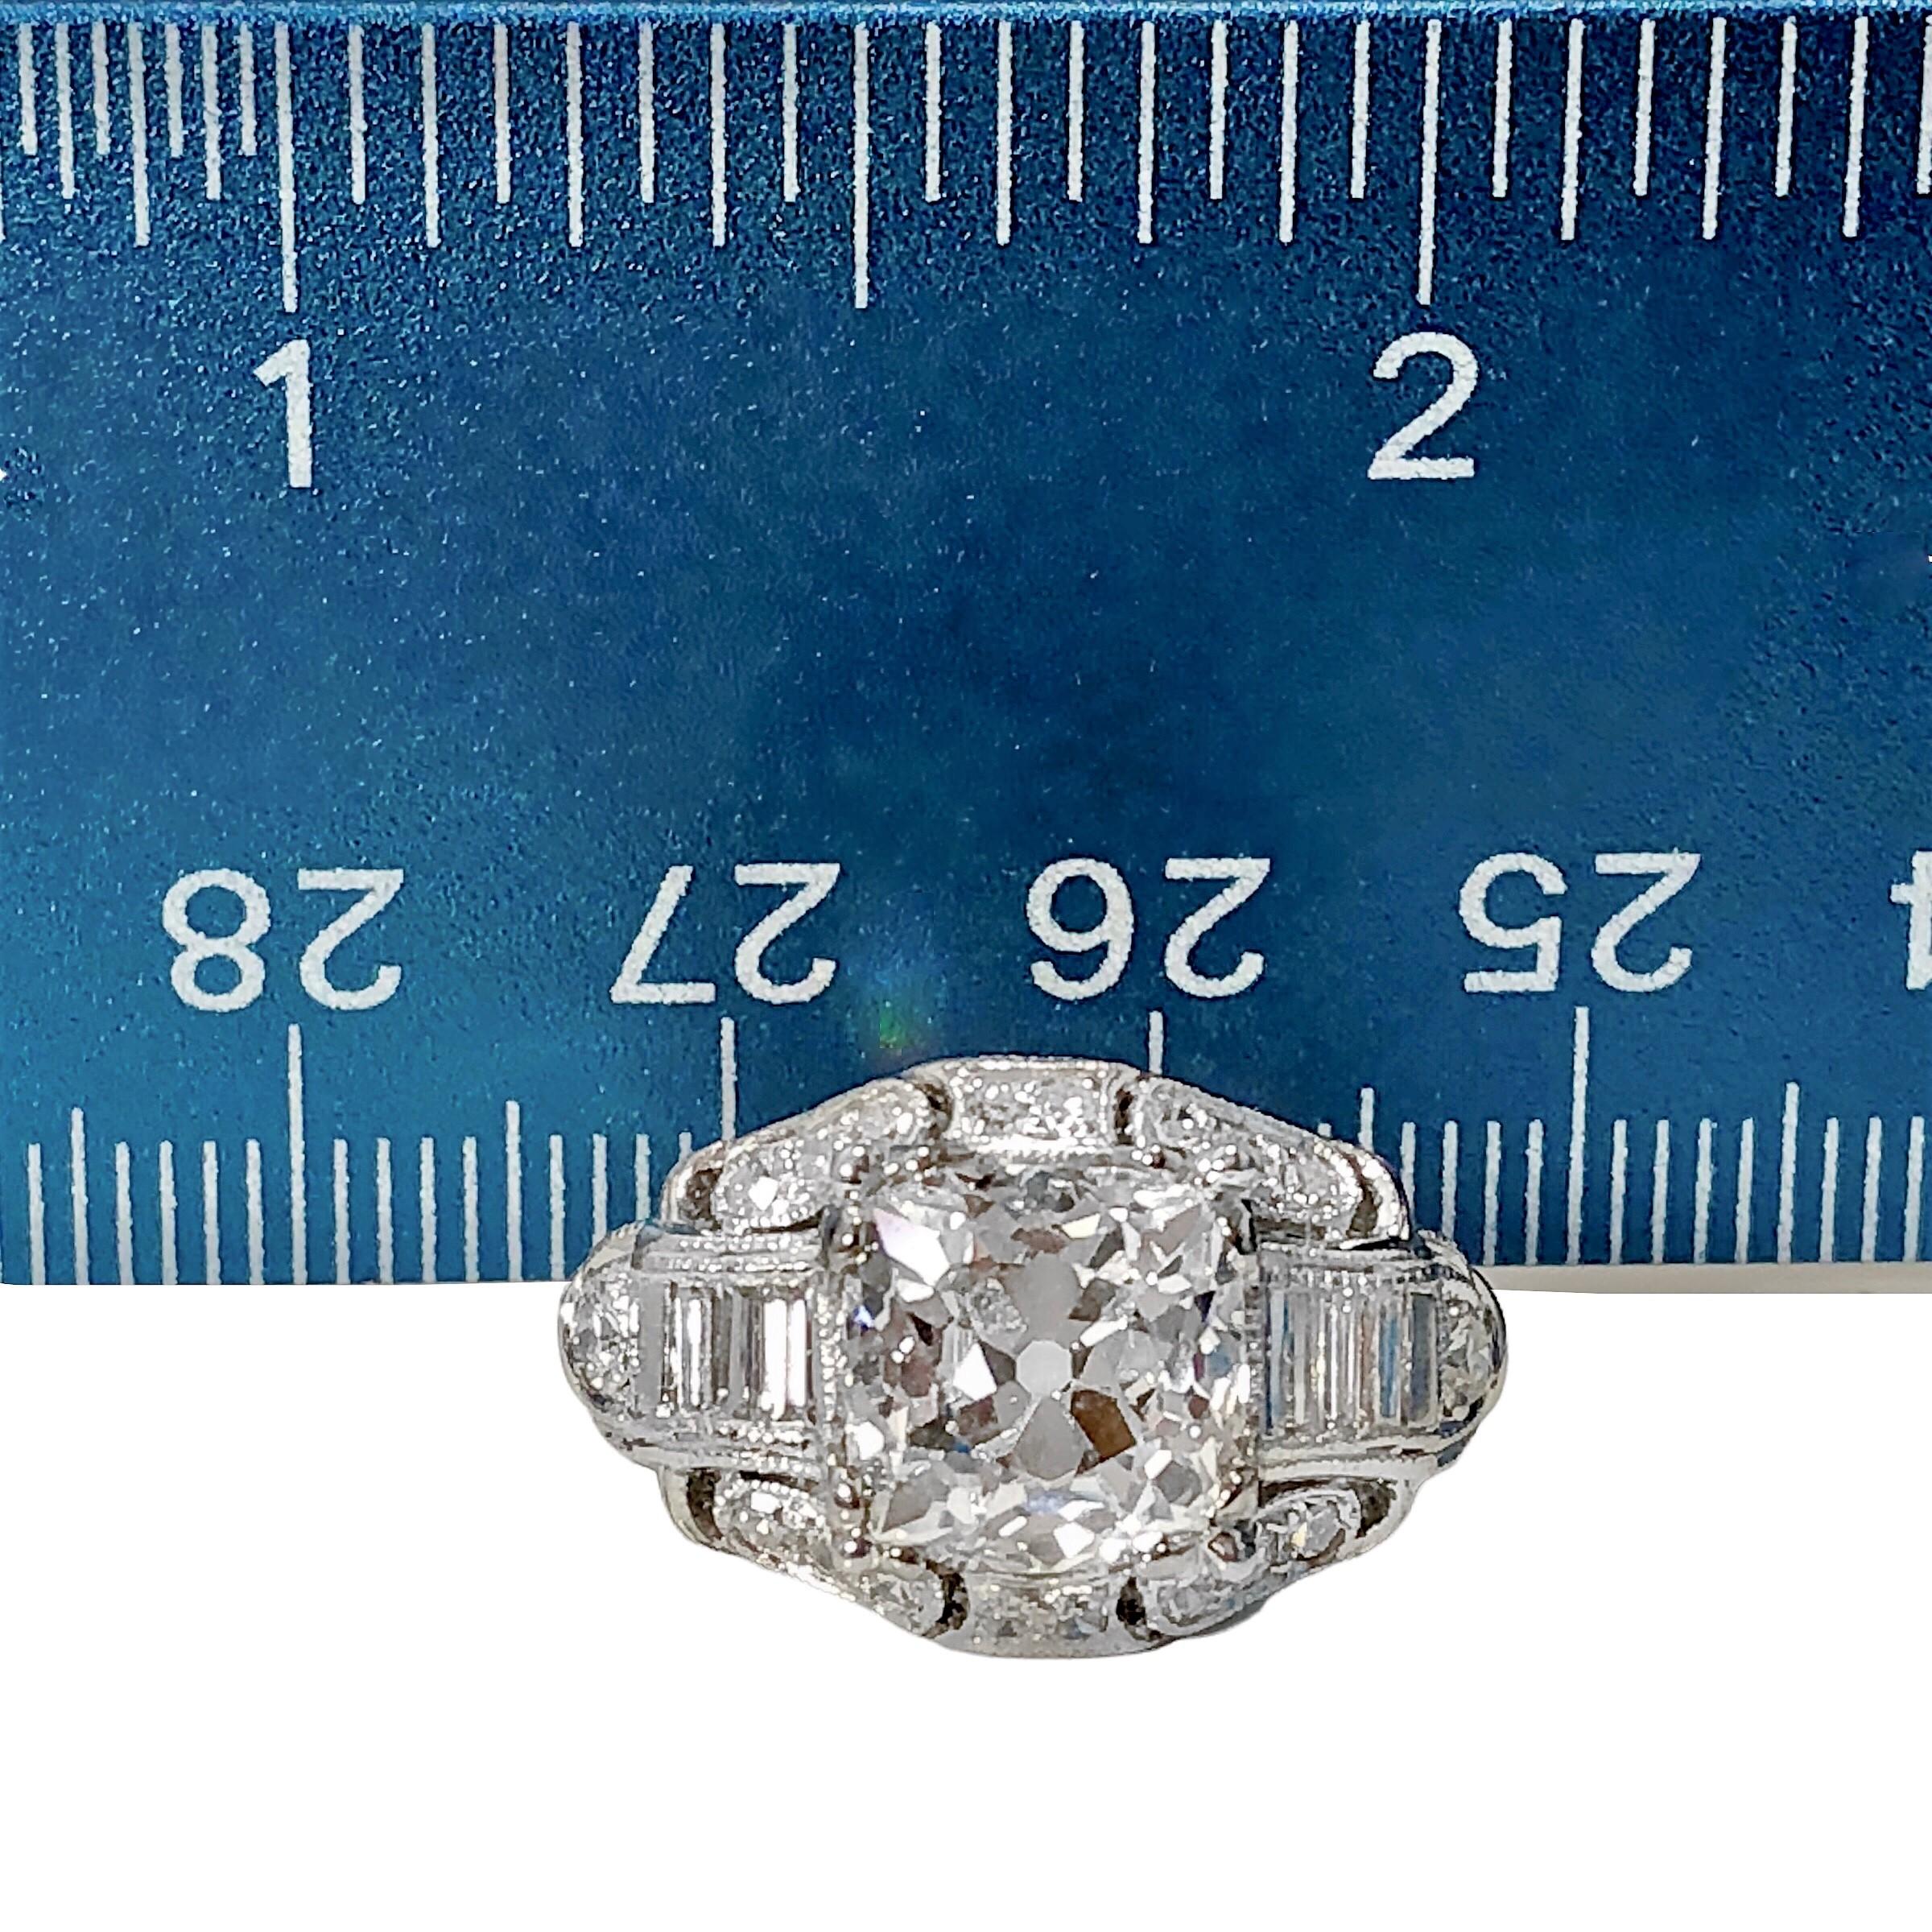 Opulent 2.98ct Old Cushion Cut Diamond in Platinum Art-Deco Solitaire Mounting 4